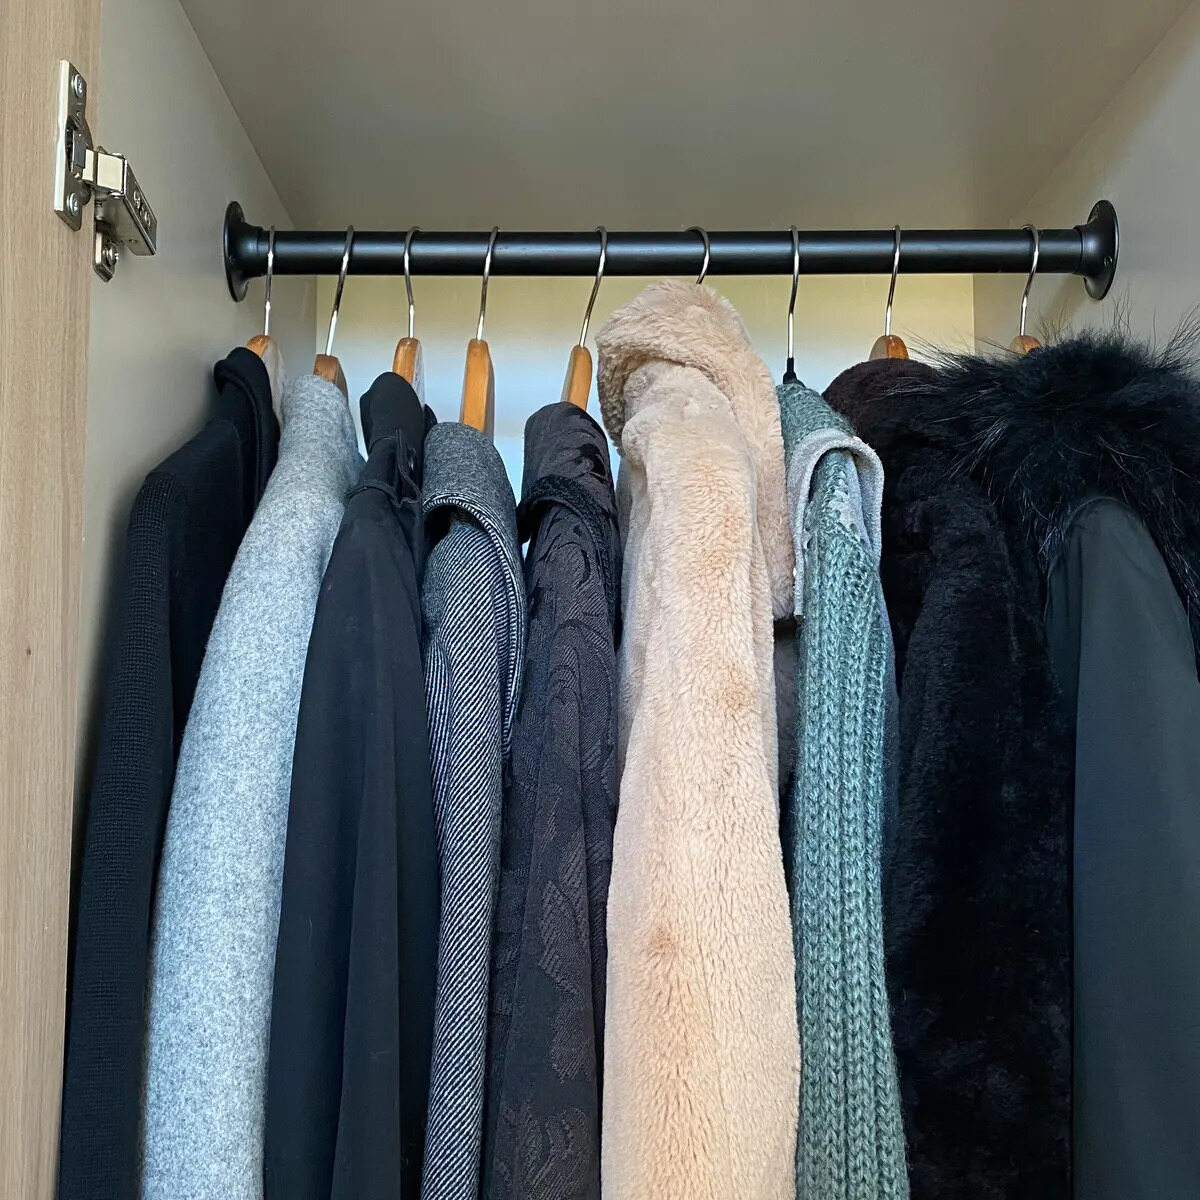 How To Store Winter Jackets